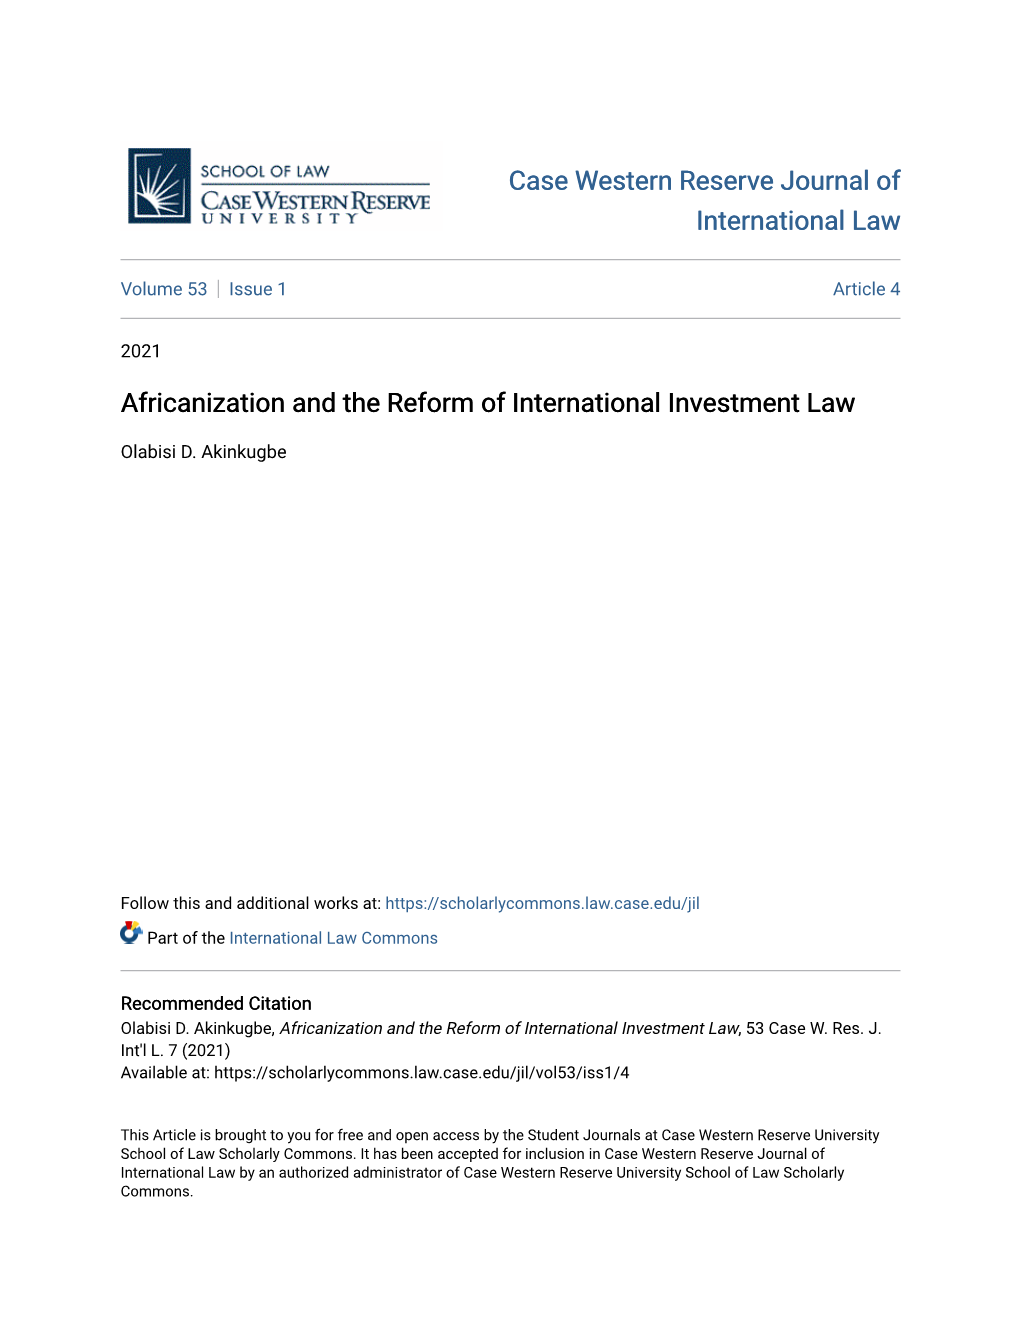 Africanization and the Reform of International Investment Law